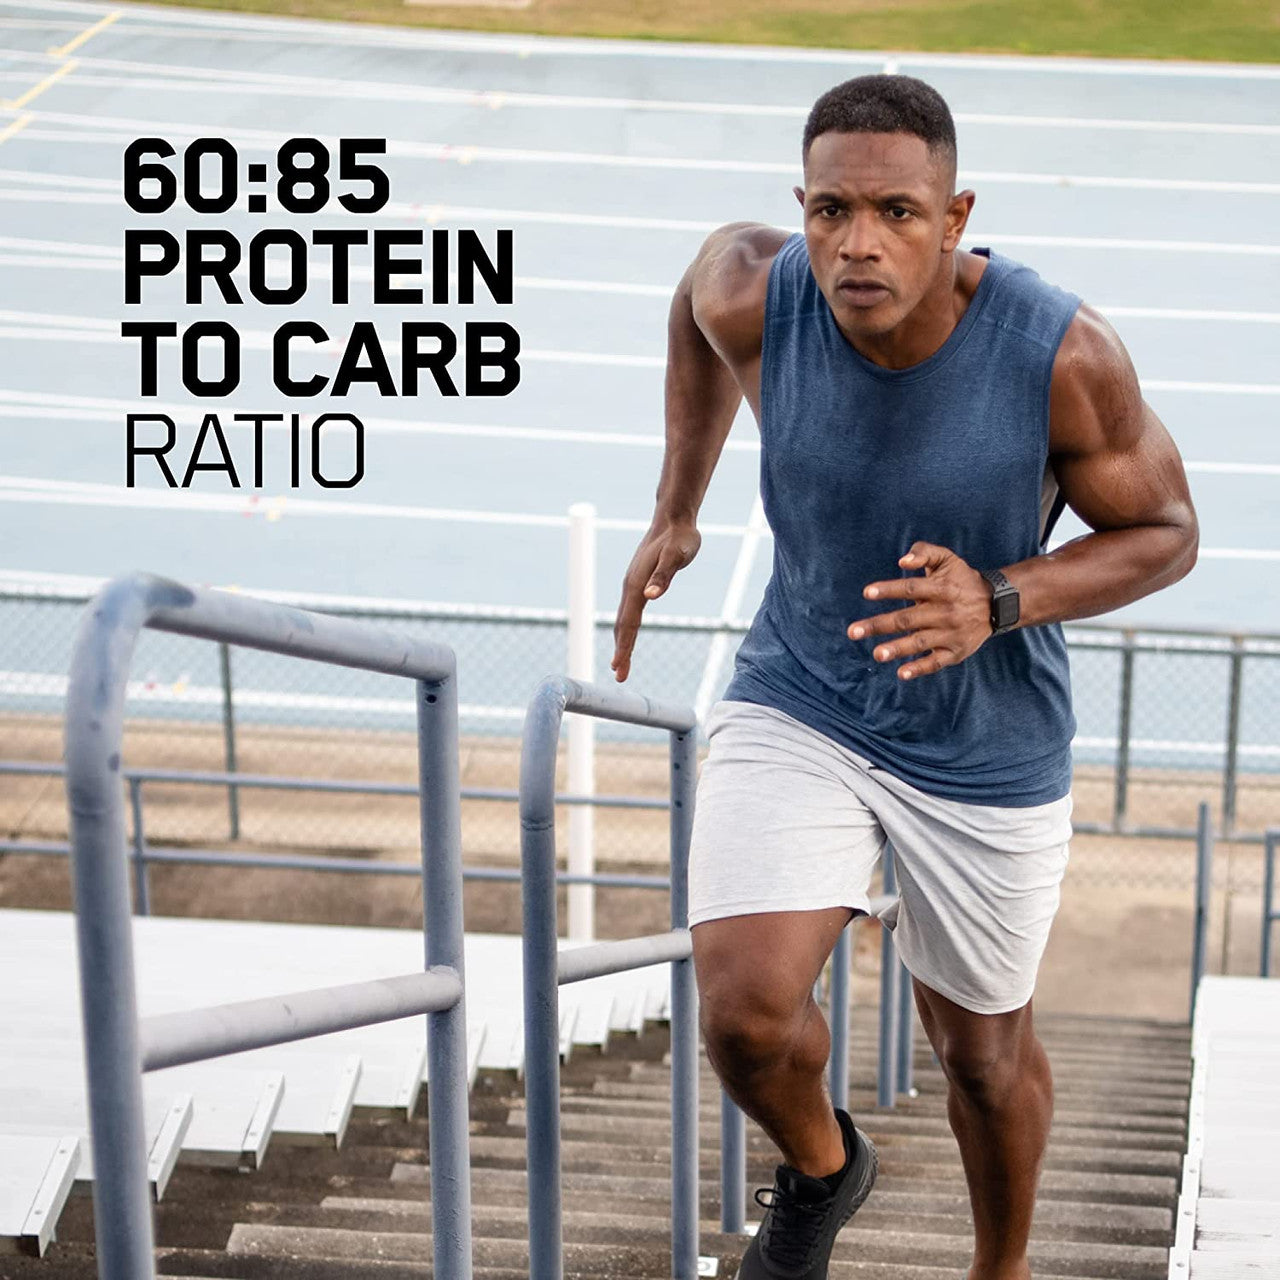 Optimum Nutrition Pro Gainer Product Highlights Protein to Carb Ratio